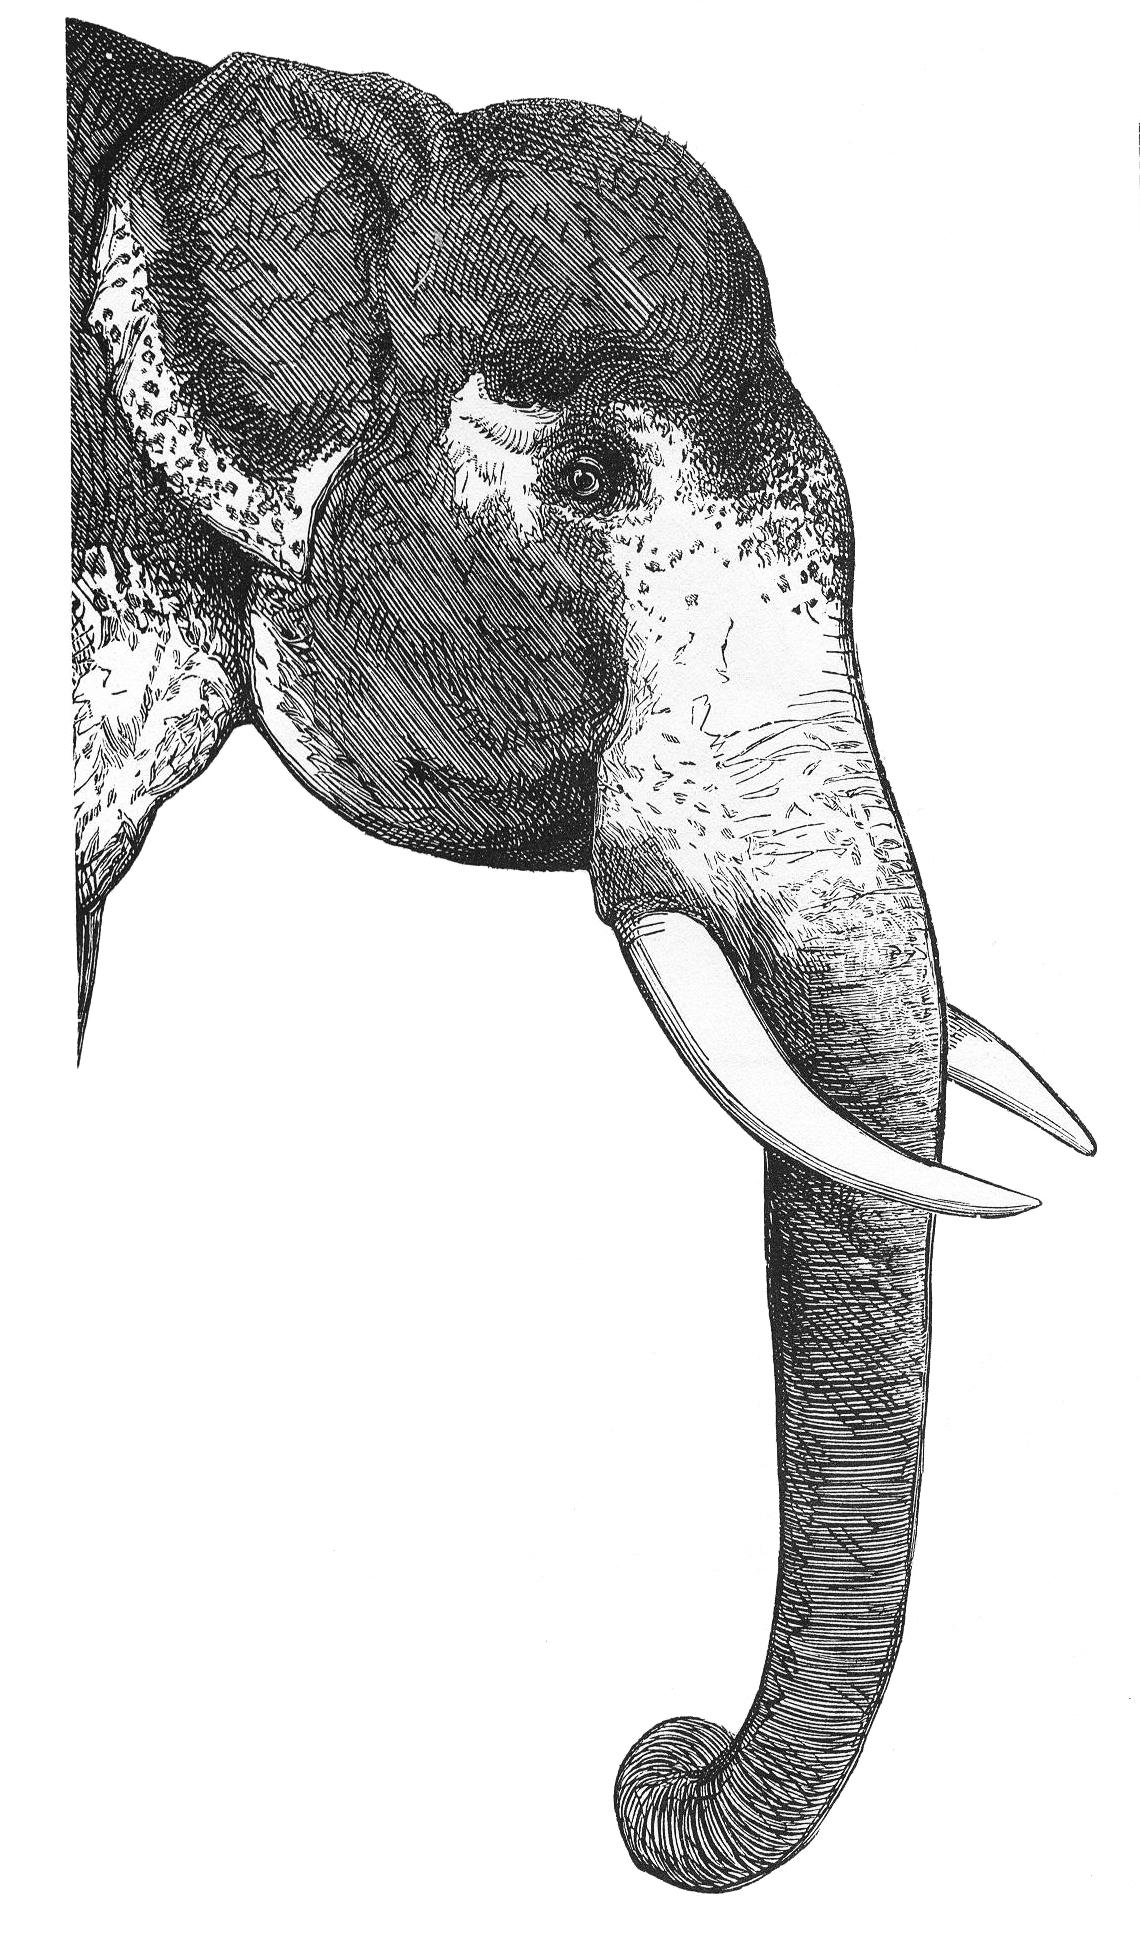 The grey and white head of an elephant, with long trunk and white tusks